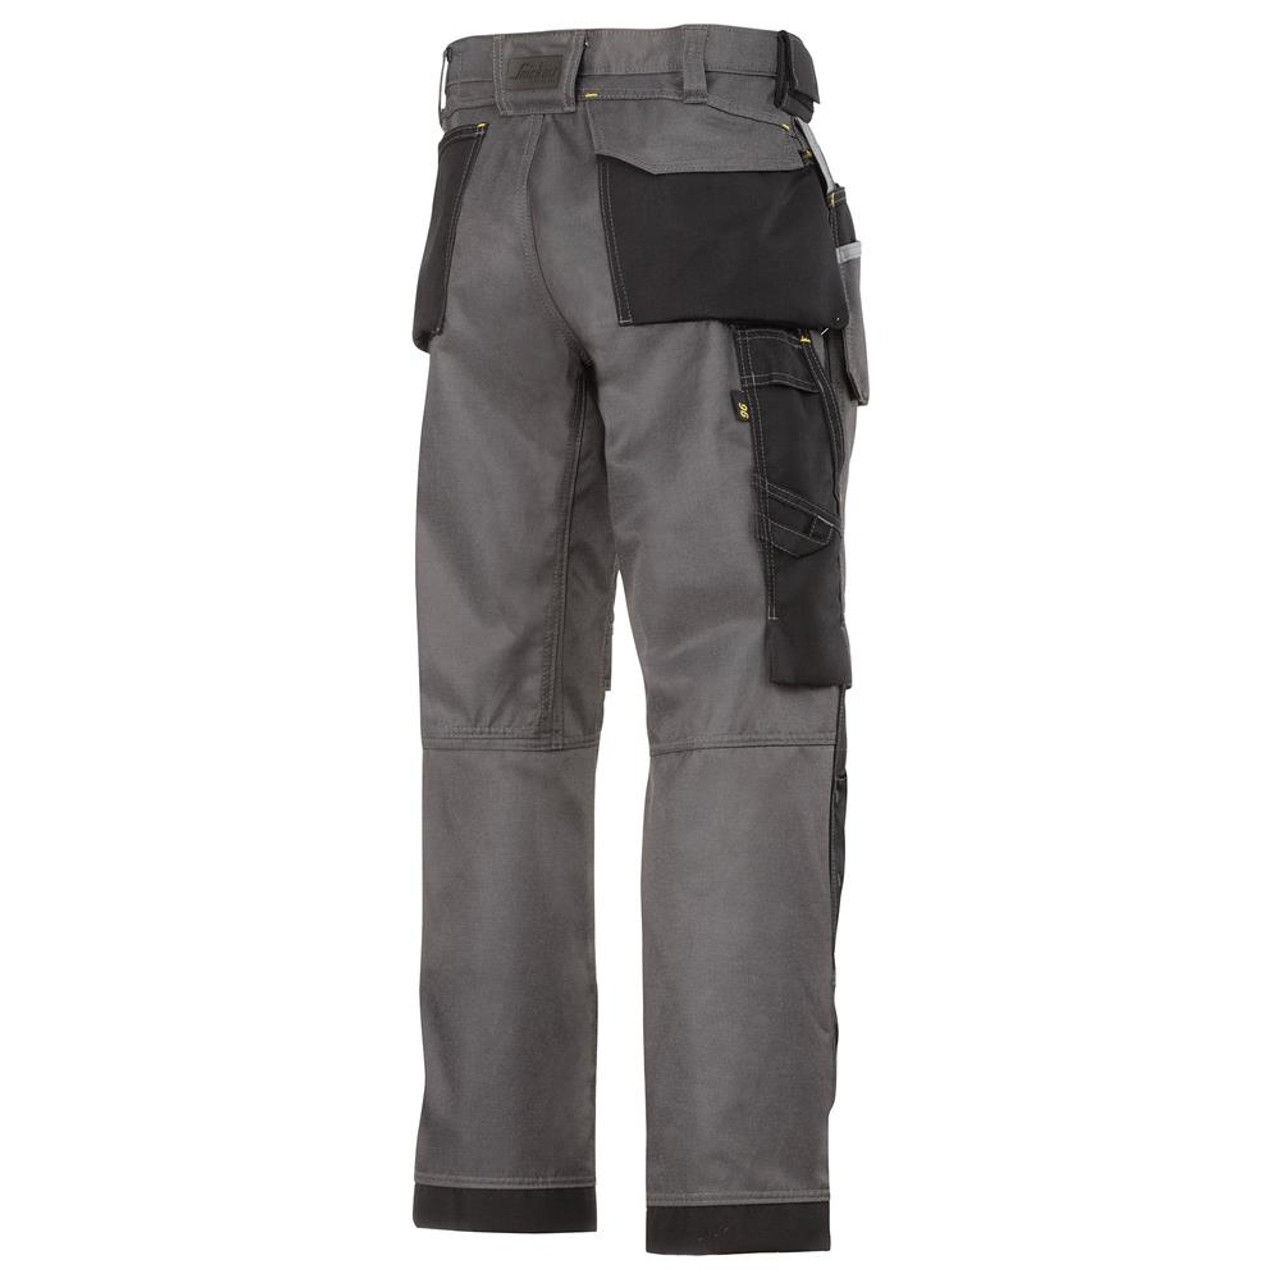 Snickers DuraTwill Trousers Kit with Knee Pads & Belt Clip - (Grey ...